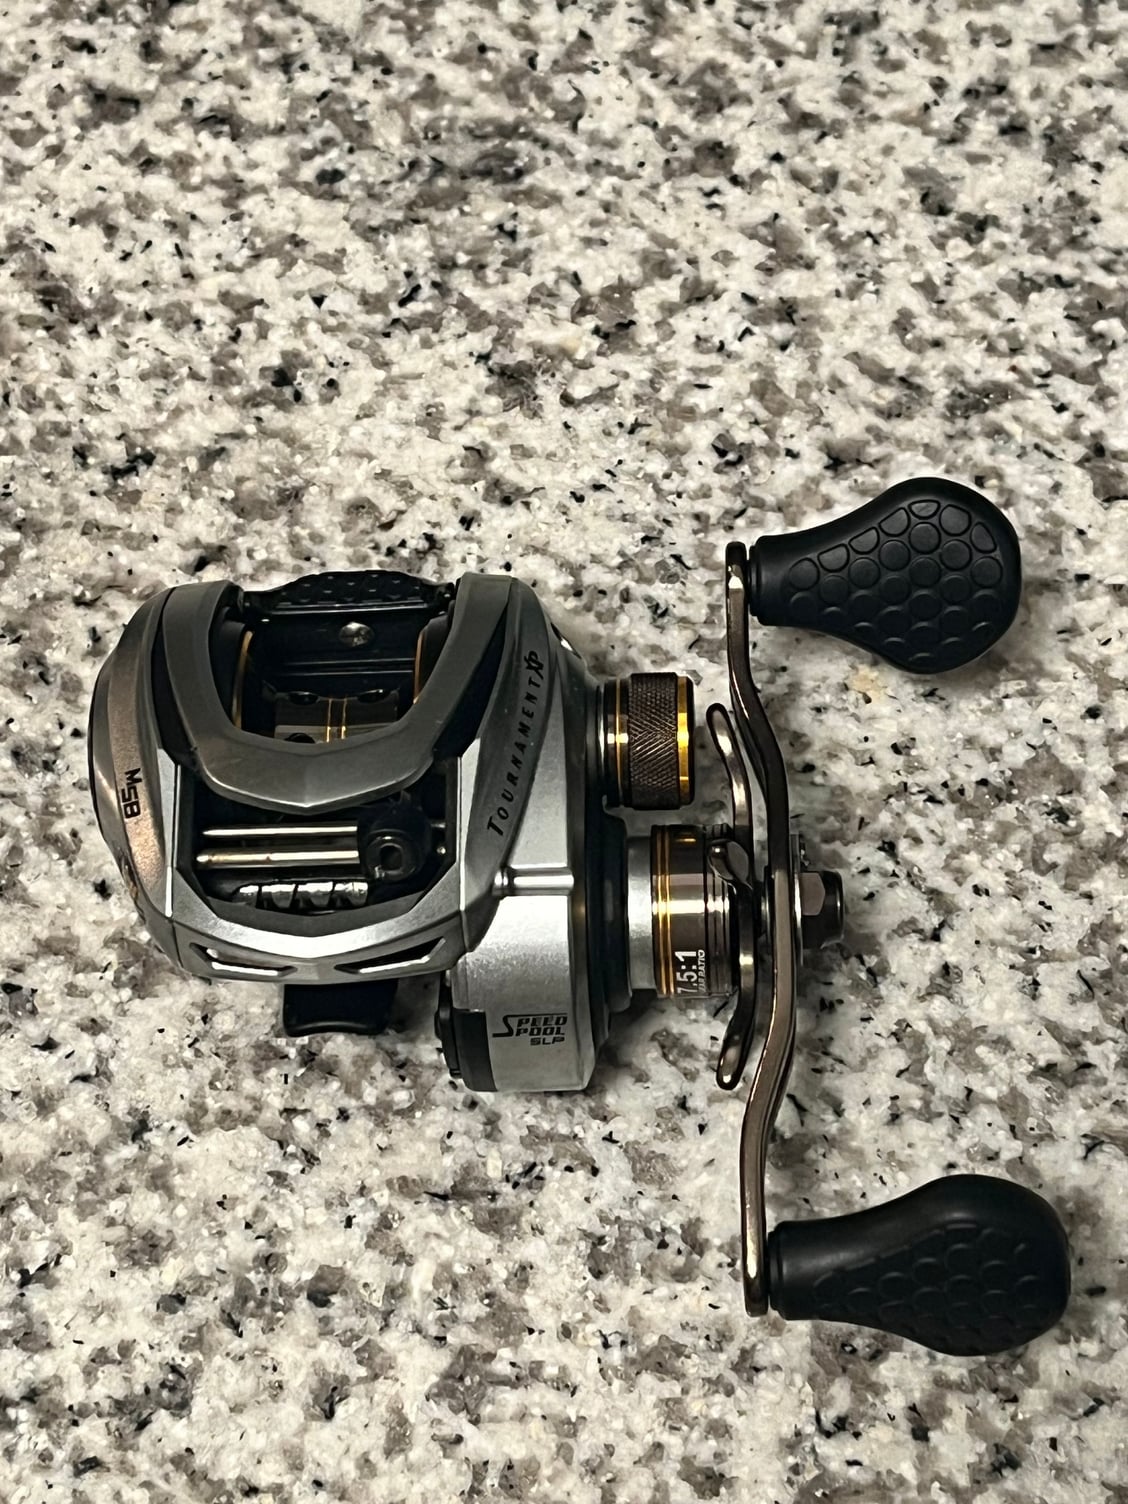 Baitcast Reels for sale- LH models - The Hull Truth - Boating and Fishing  Forum